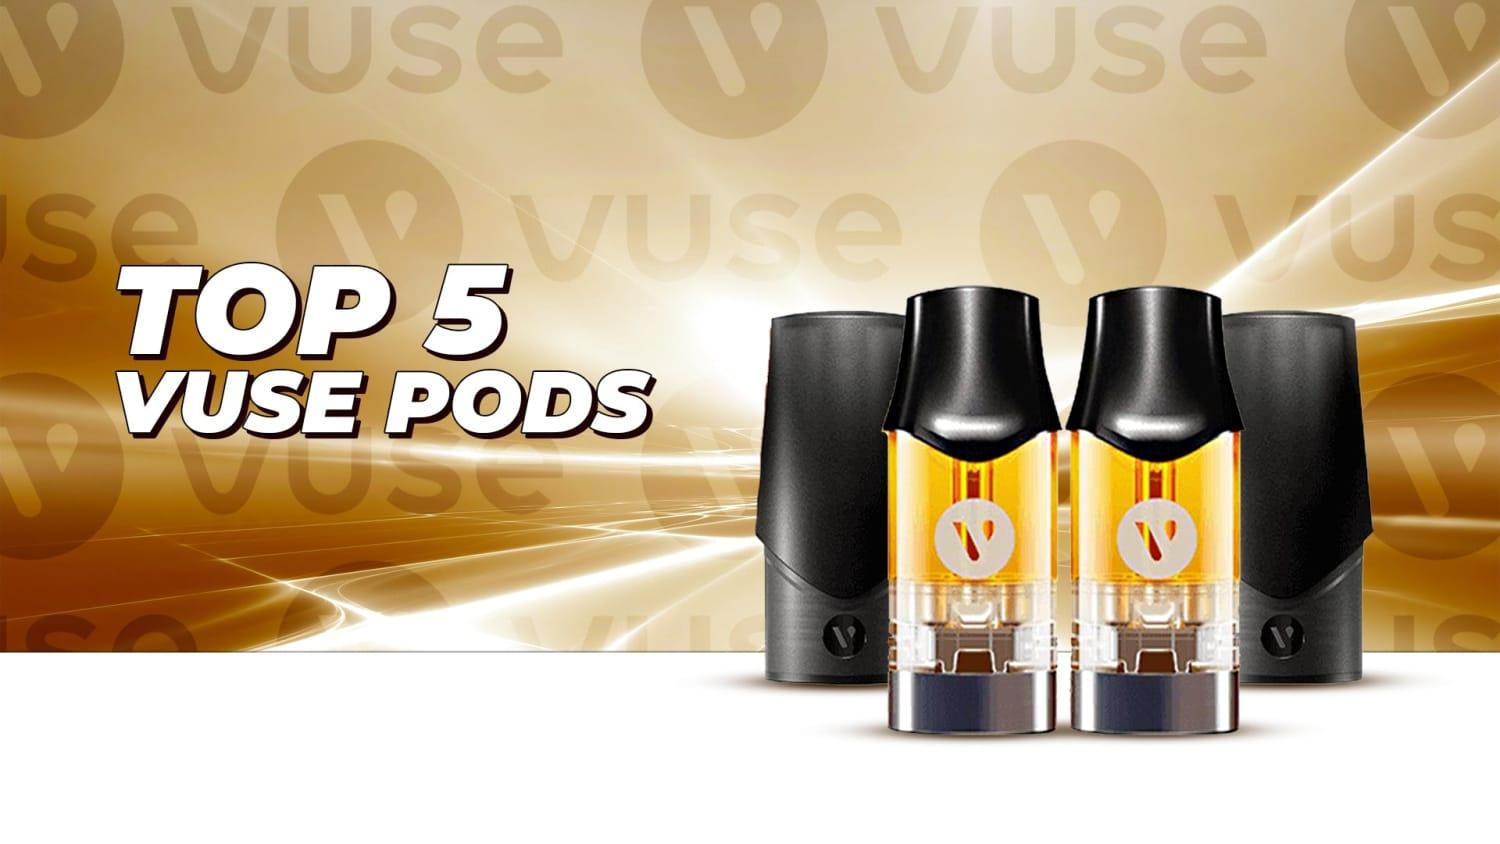 Top 5 Vuse Pods - Brand:Vuse, Category:Pods & Cartridges, Sub Category:Prefilled Pods